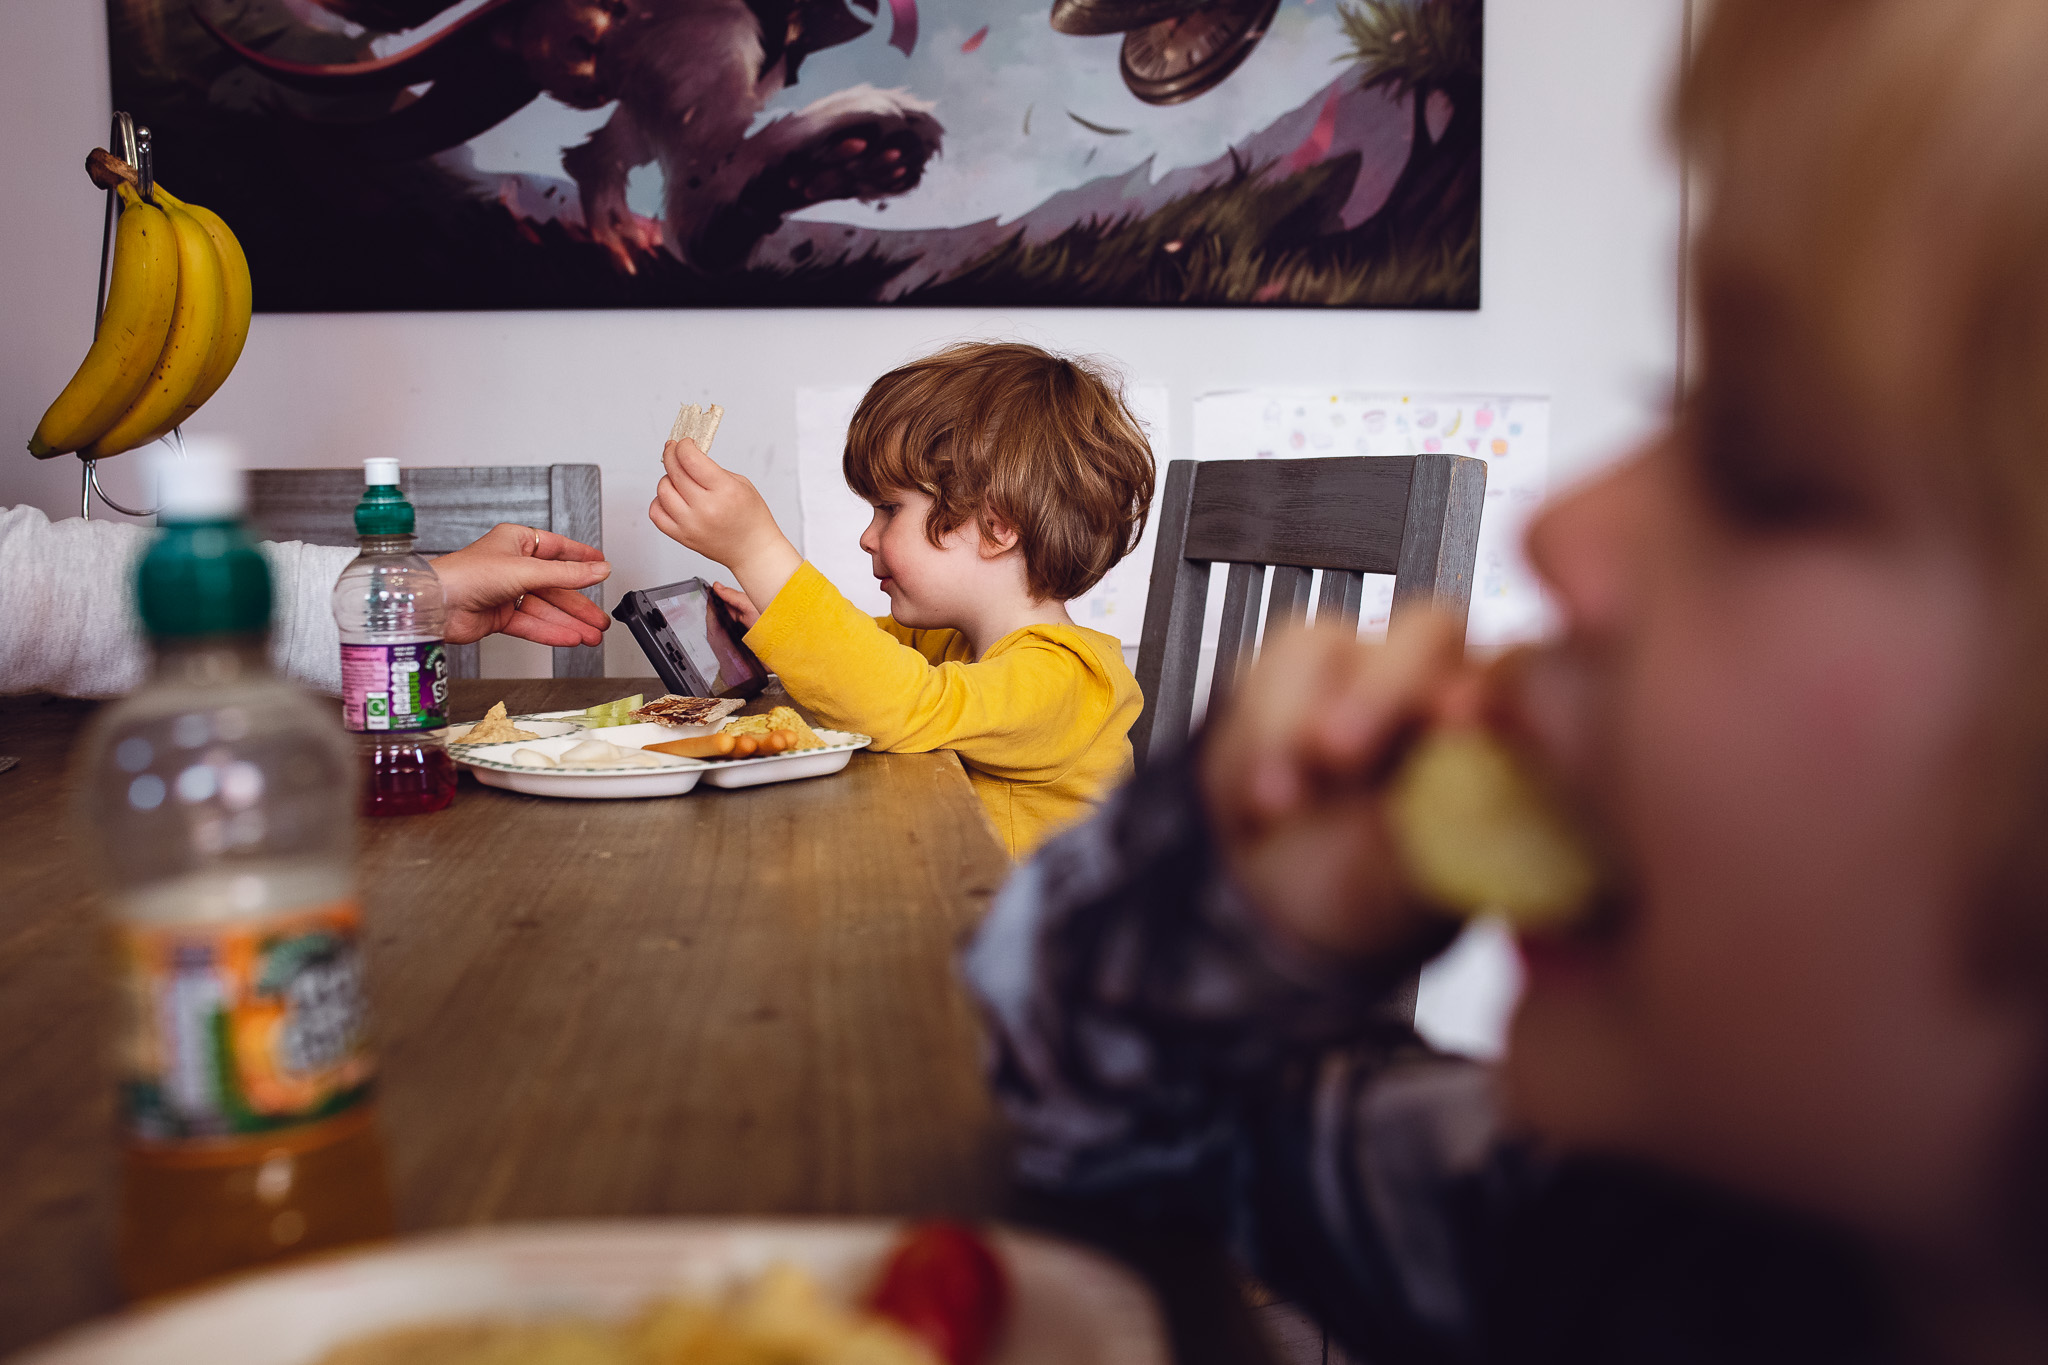 Leo eating lunch and playing on his Nintendo switch at the table during a family photo session